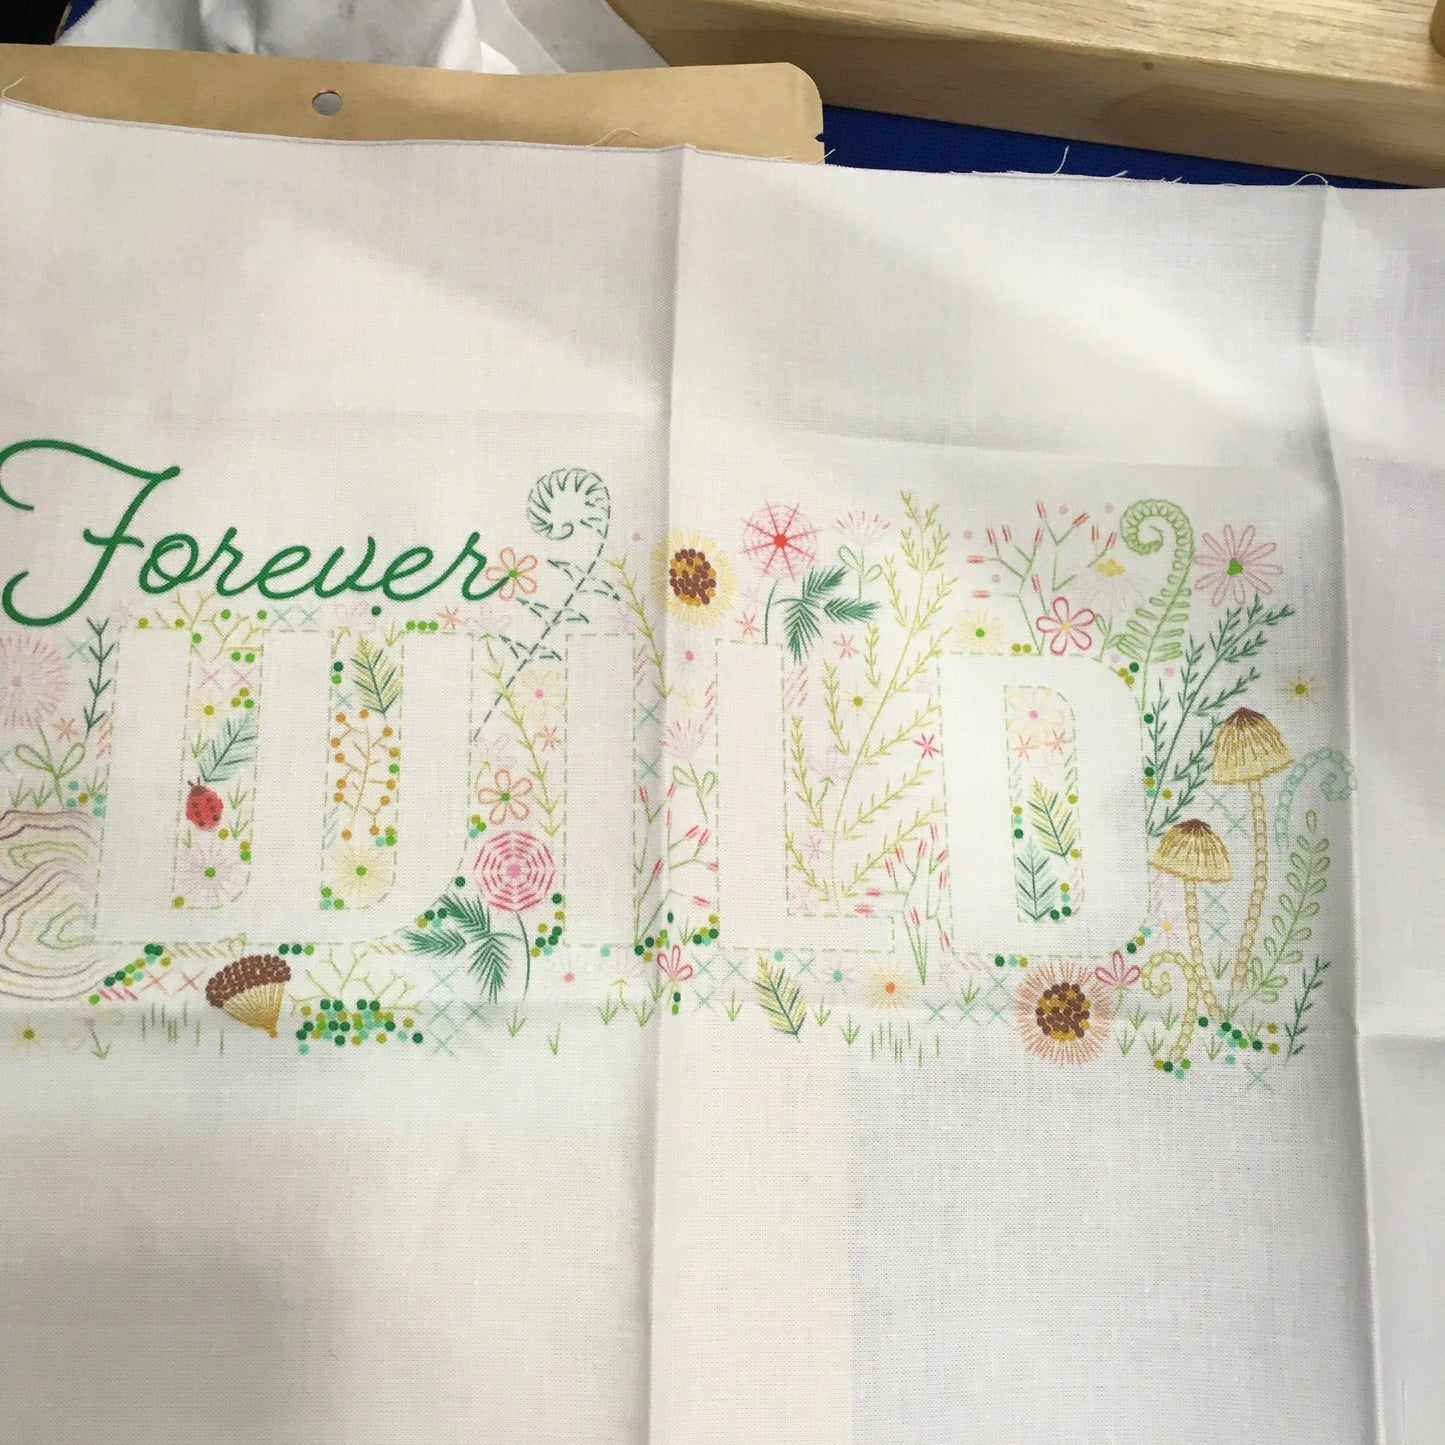 Stash Buster! Forever Wild Embroidery Kit-Wholesale